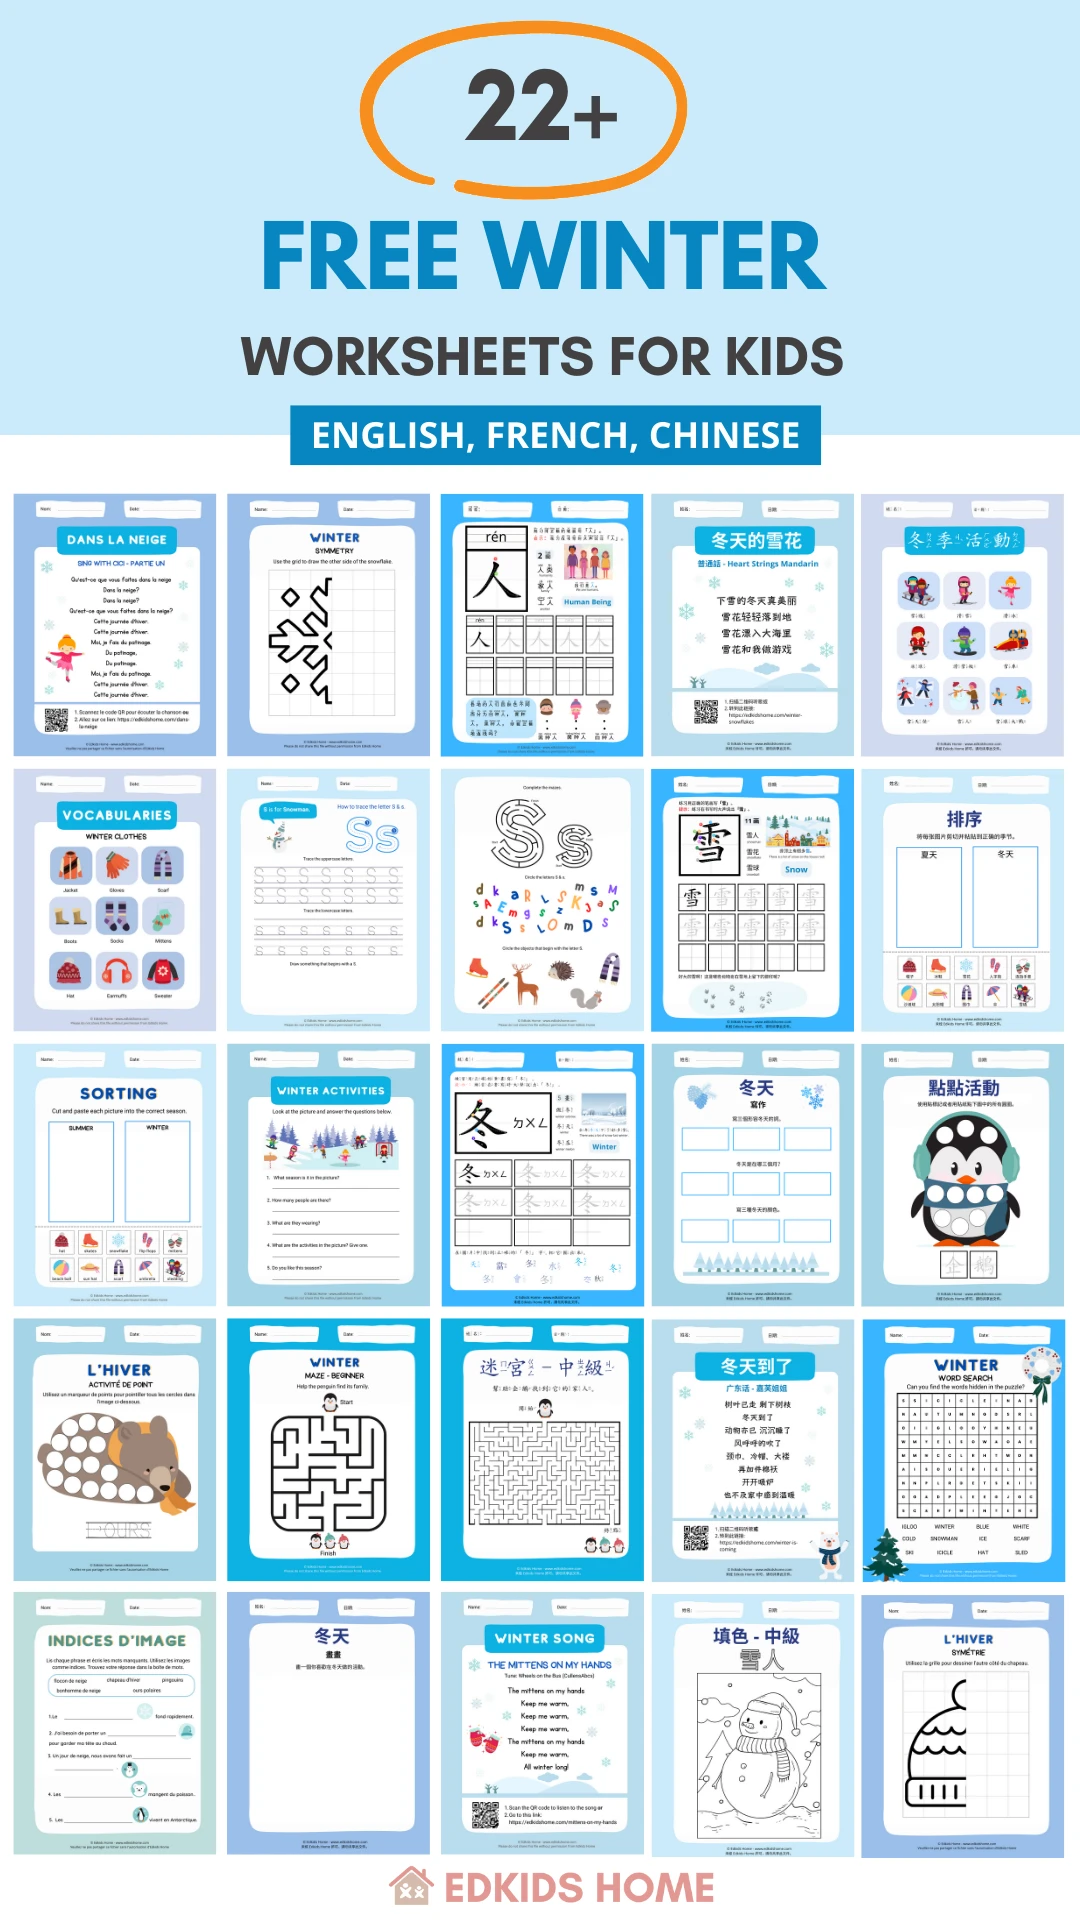 22+ Free Winter Worksheets for Kids (English, French, Chinese)